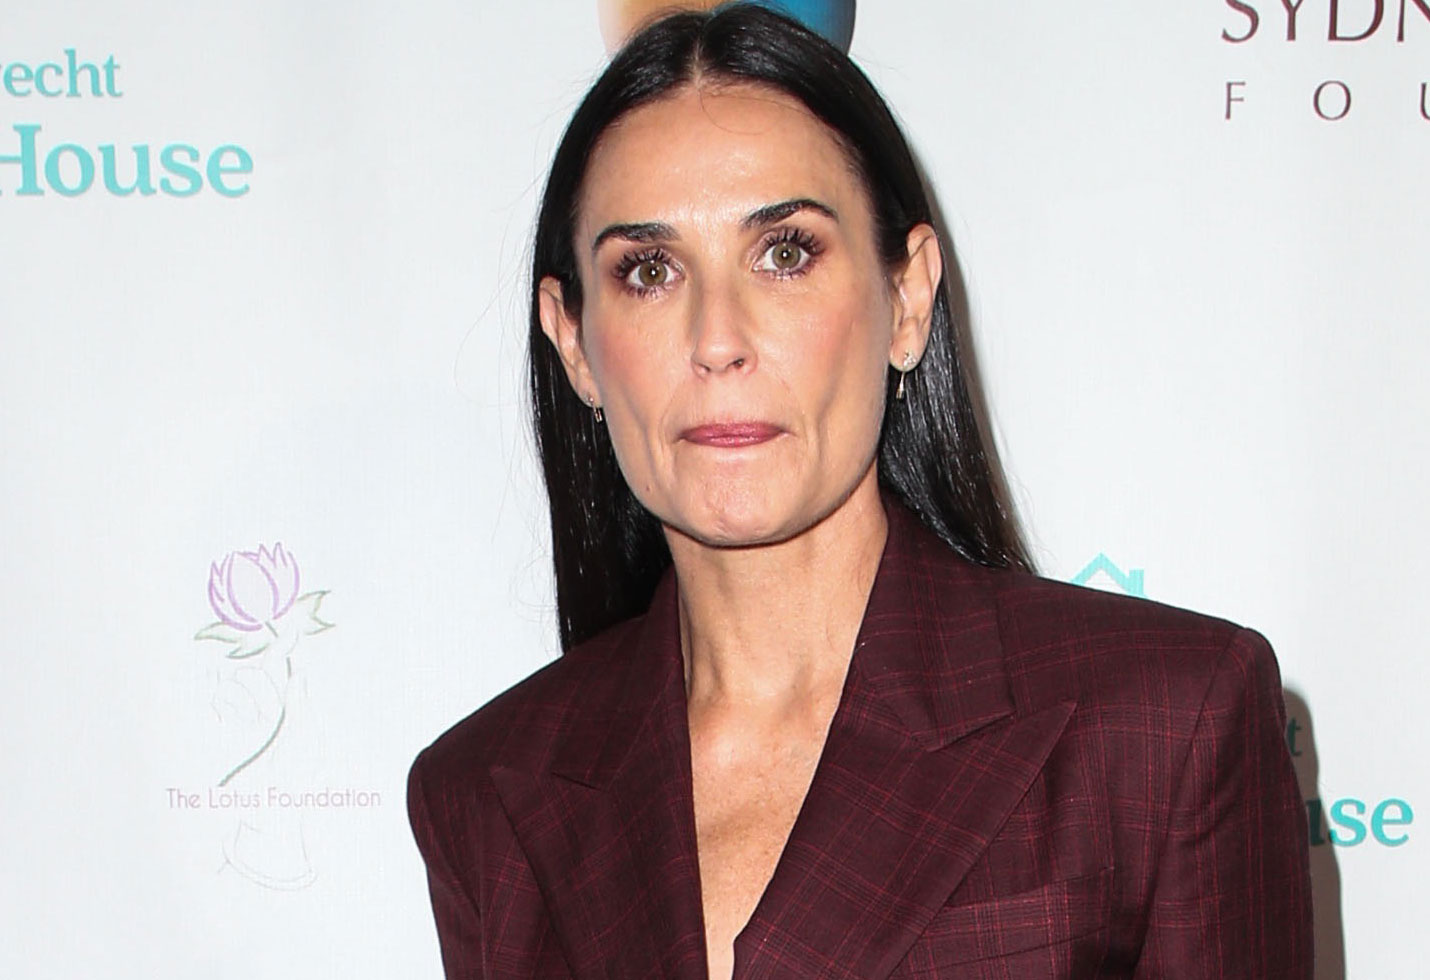 Demi Moore Opens Up About Recovering From Substance Abuse